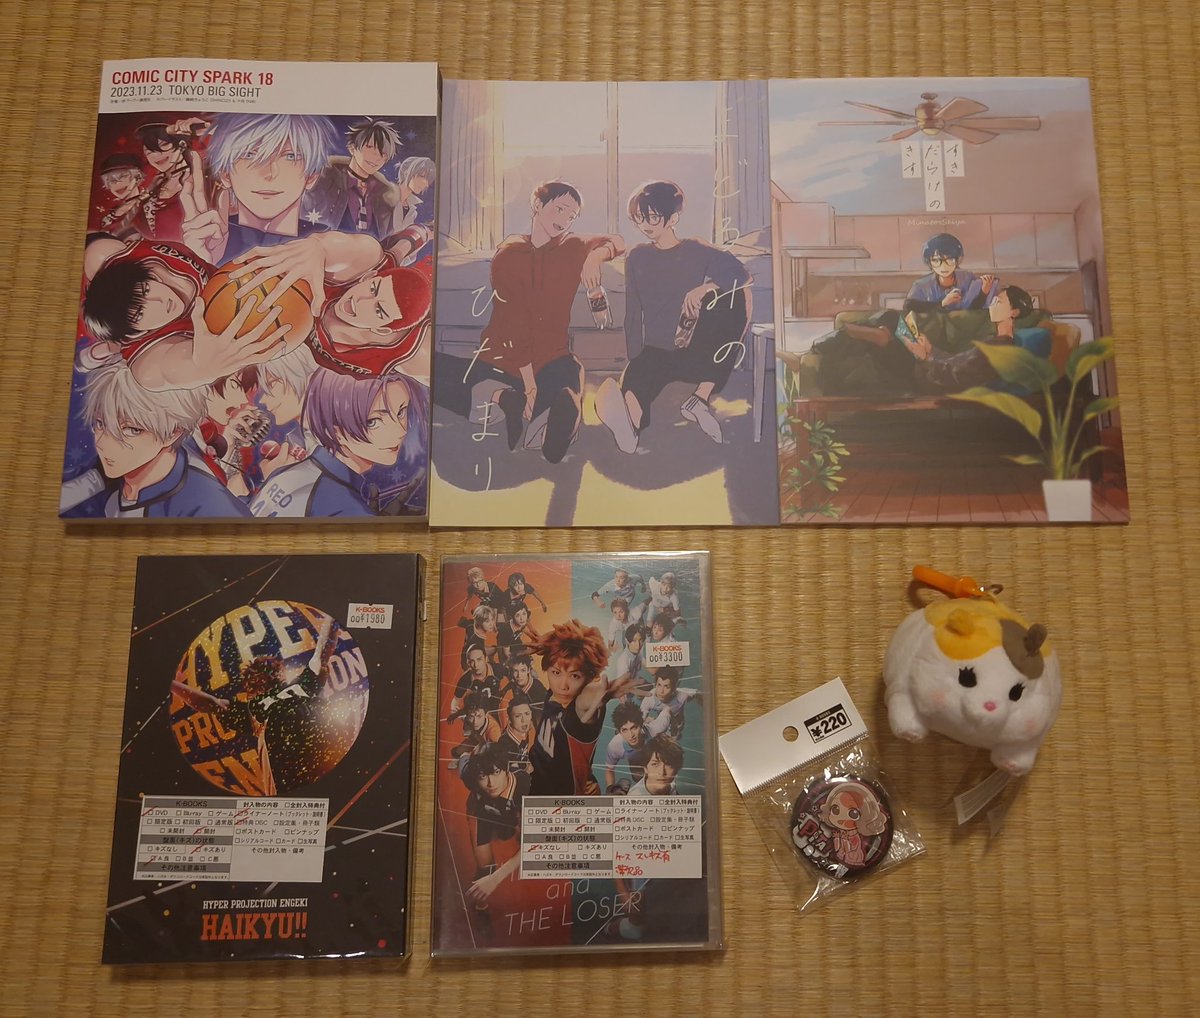 I, uh, spent quite a bit of money at Spark, but it was so worth it 😭 so much teredio!! 💕💕 also found some lovely Tsurune doujinshi.

We went to K-Books afterwards and I'm so happy about the Engeki Haikyuu stuff. Also fat cat from EoCafe.